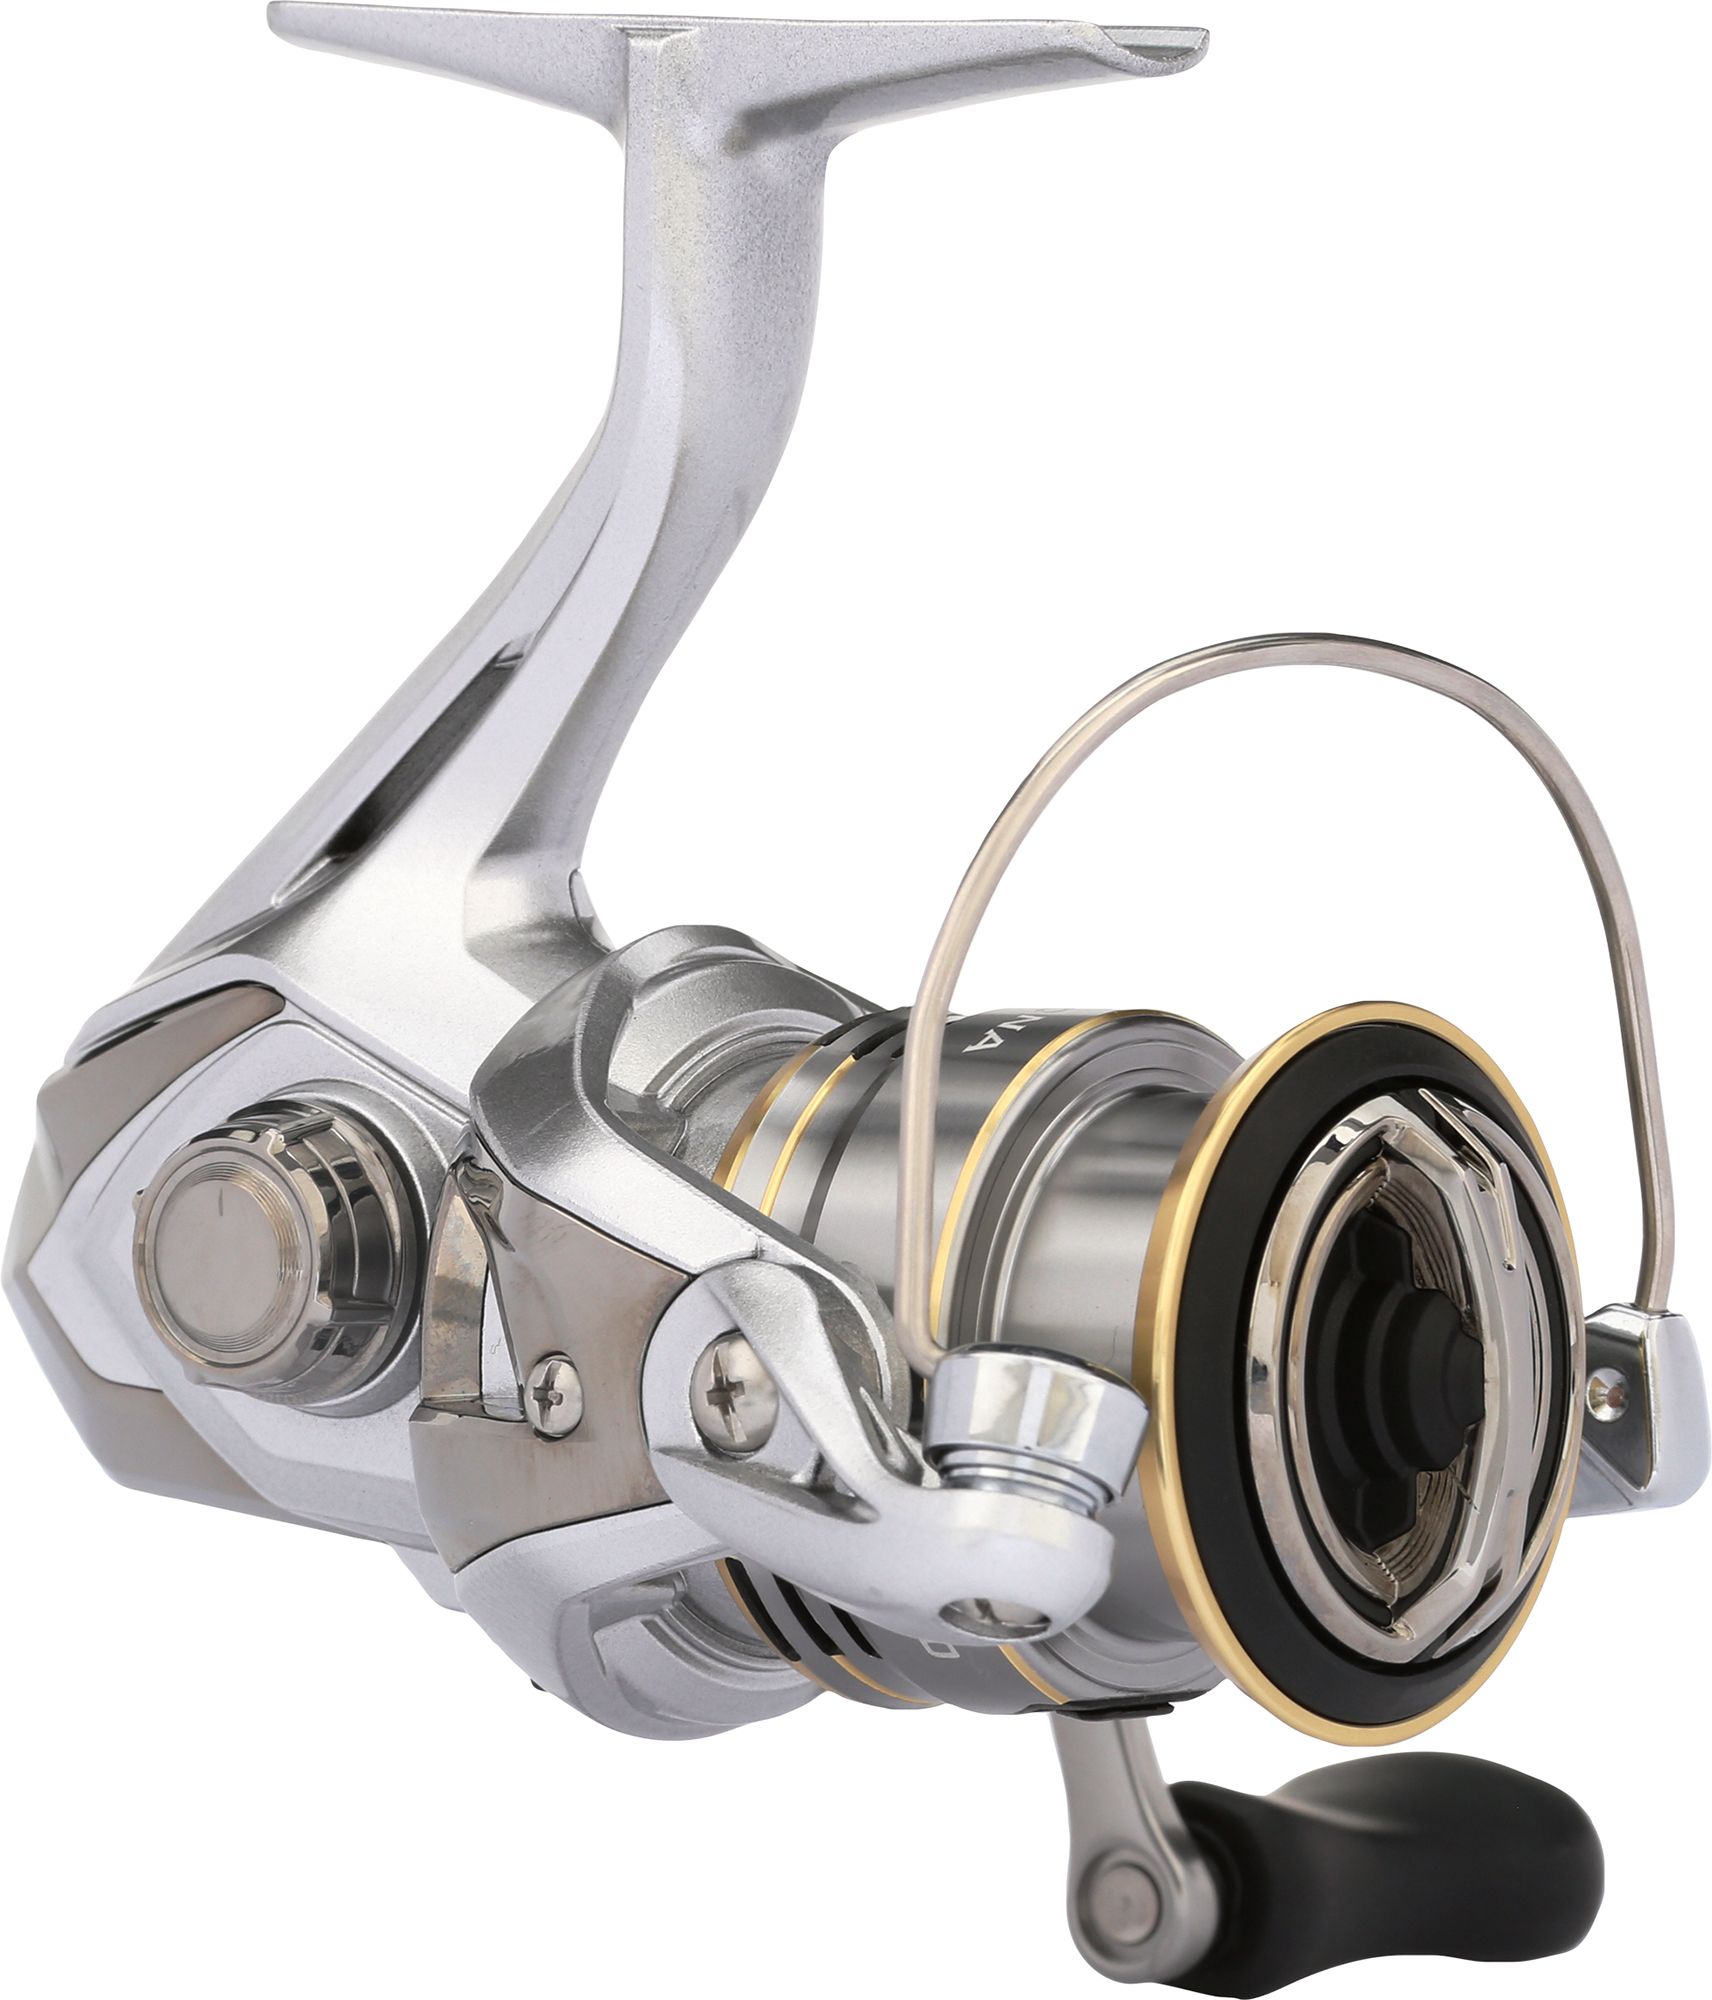 Photos - Other for Fishing Shimano Sedona FJ Spinning Reel 23SHMUSDN1000FJCLREE 